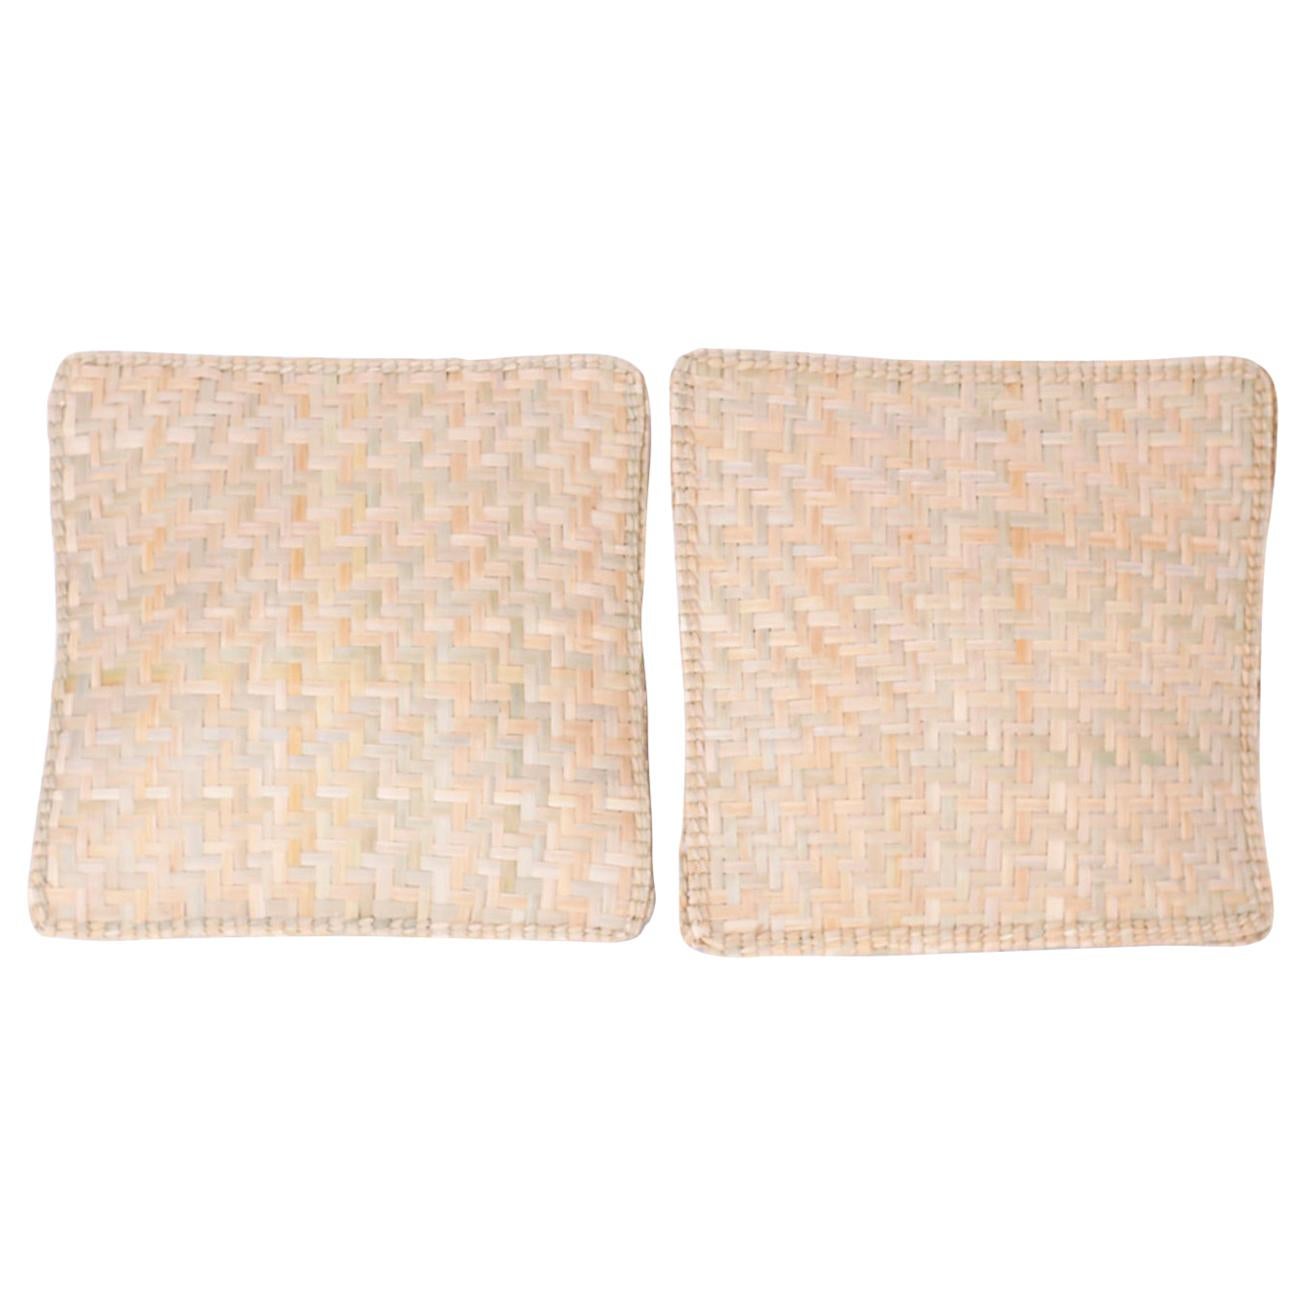 Pair of Woven Reed Pillows